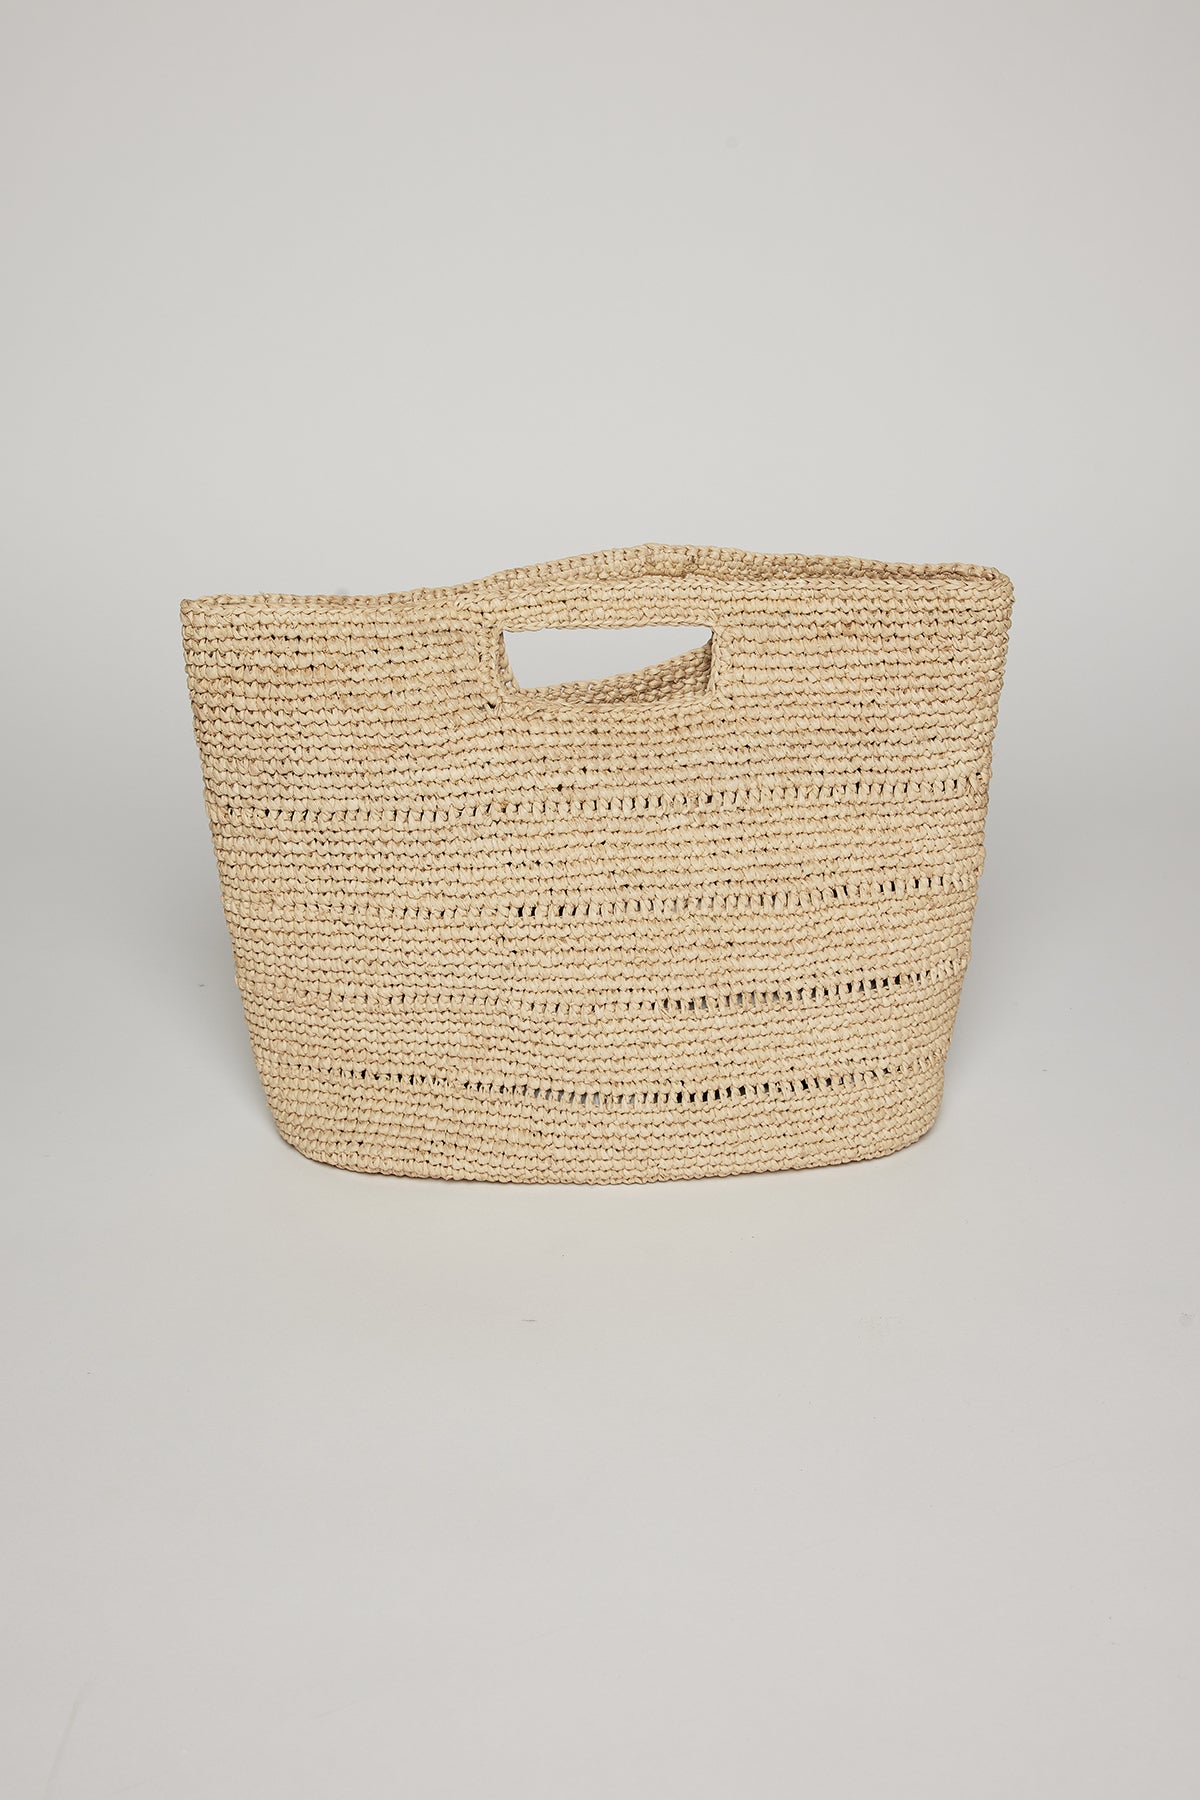   A beige raffia Naomi handheld straw bag by Velvet by Graham & Spencer with horizontal patterns, displayed against a plain white background. 